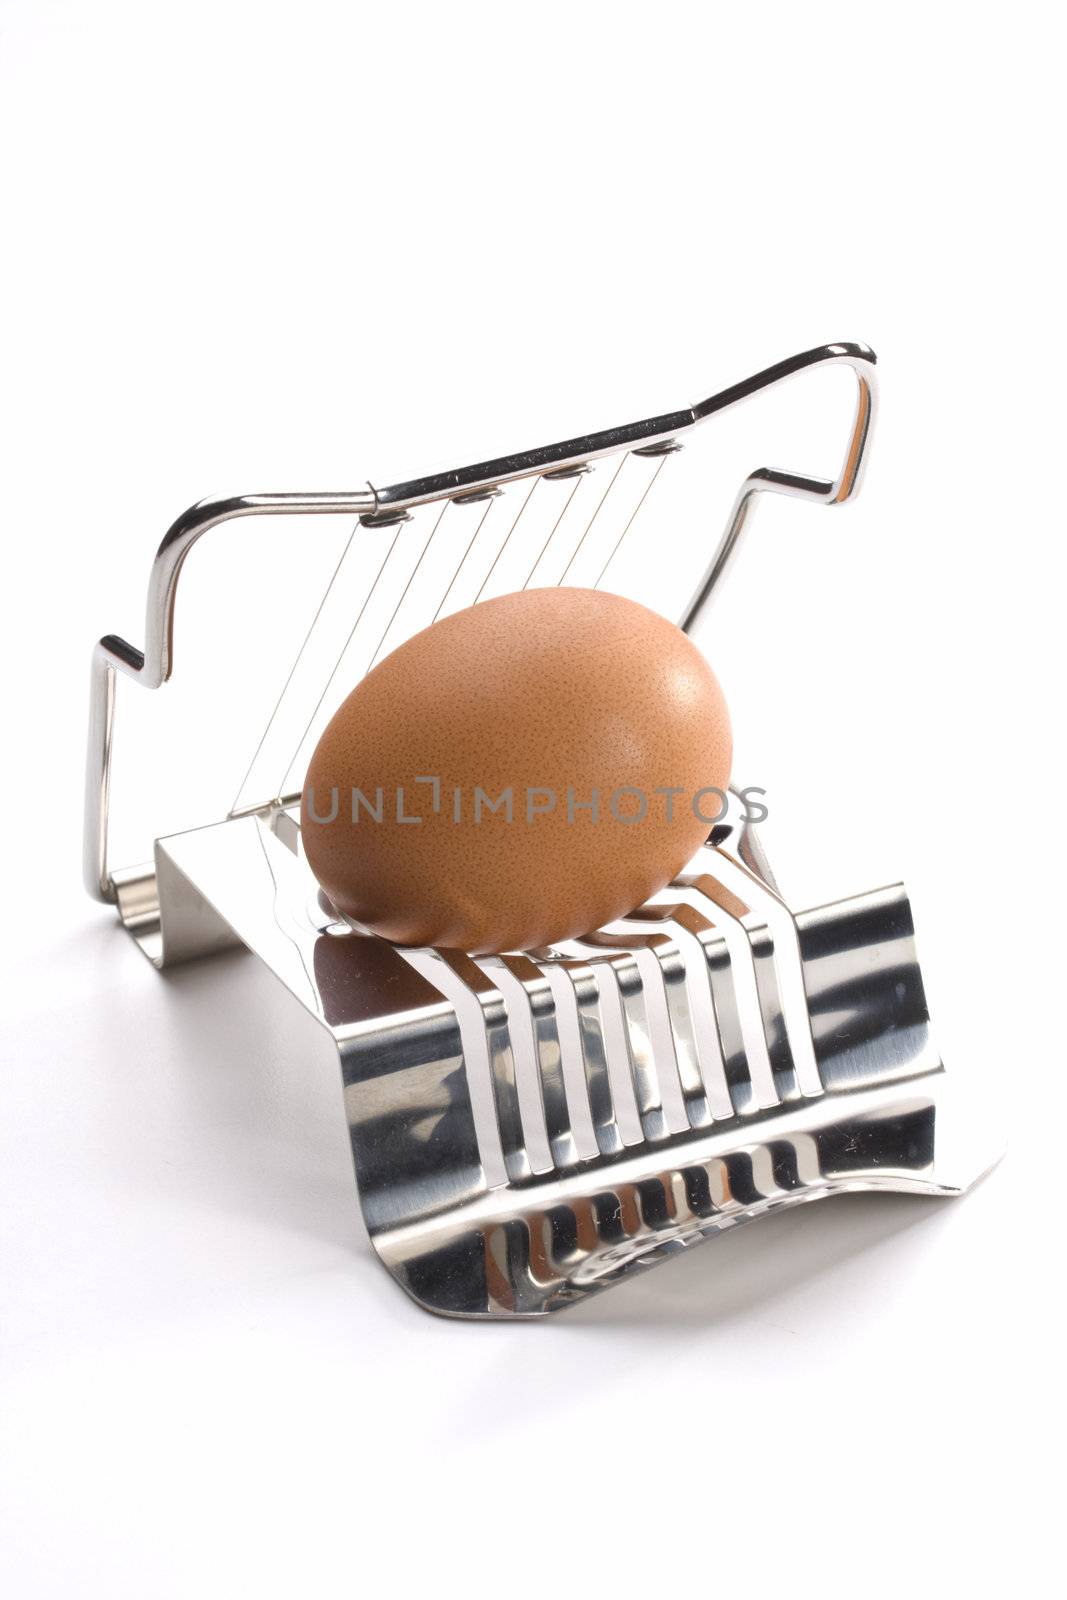 egg cutter with an egg on white background by bernjuer